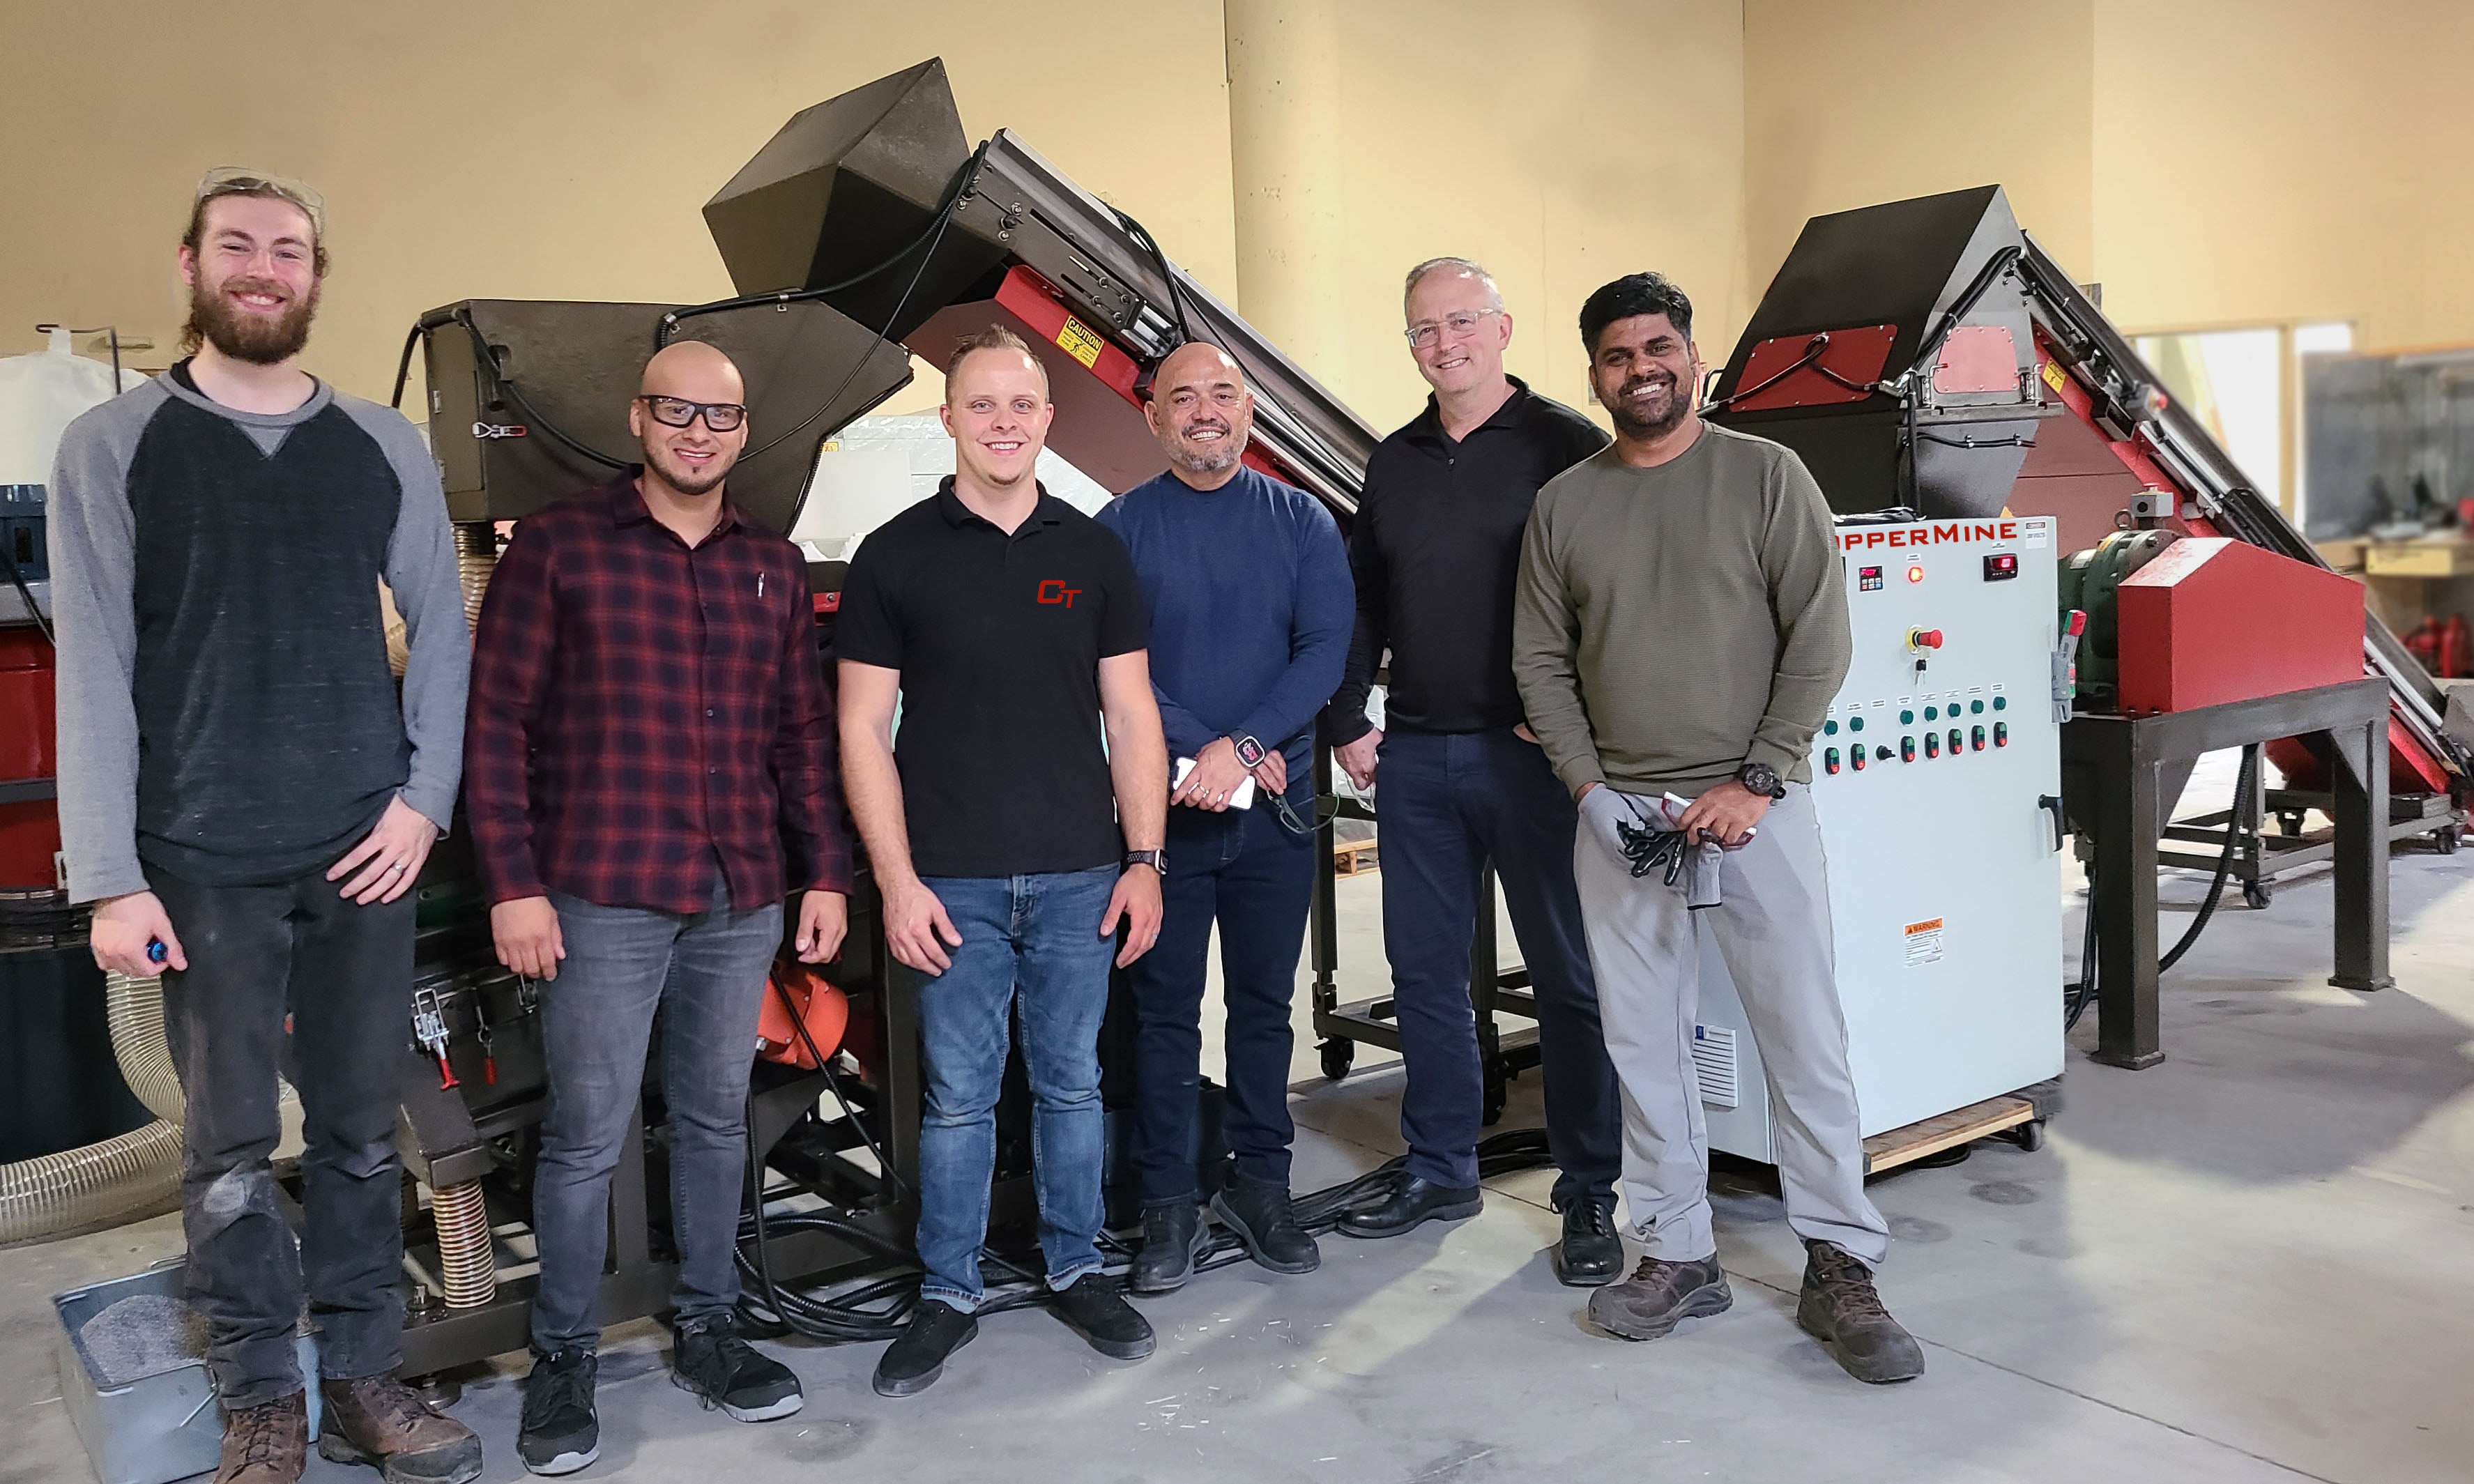 technical and mechanical copper system support team at CopperMine for copper granulators, copper wire strippers, and cable cutters